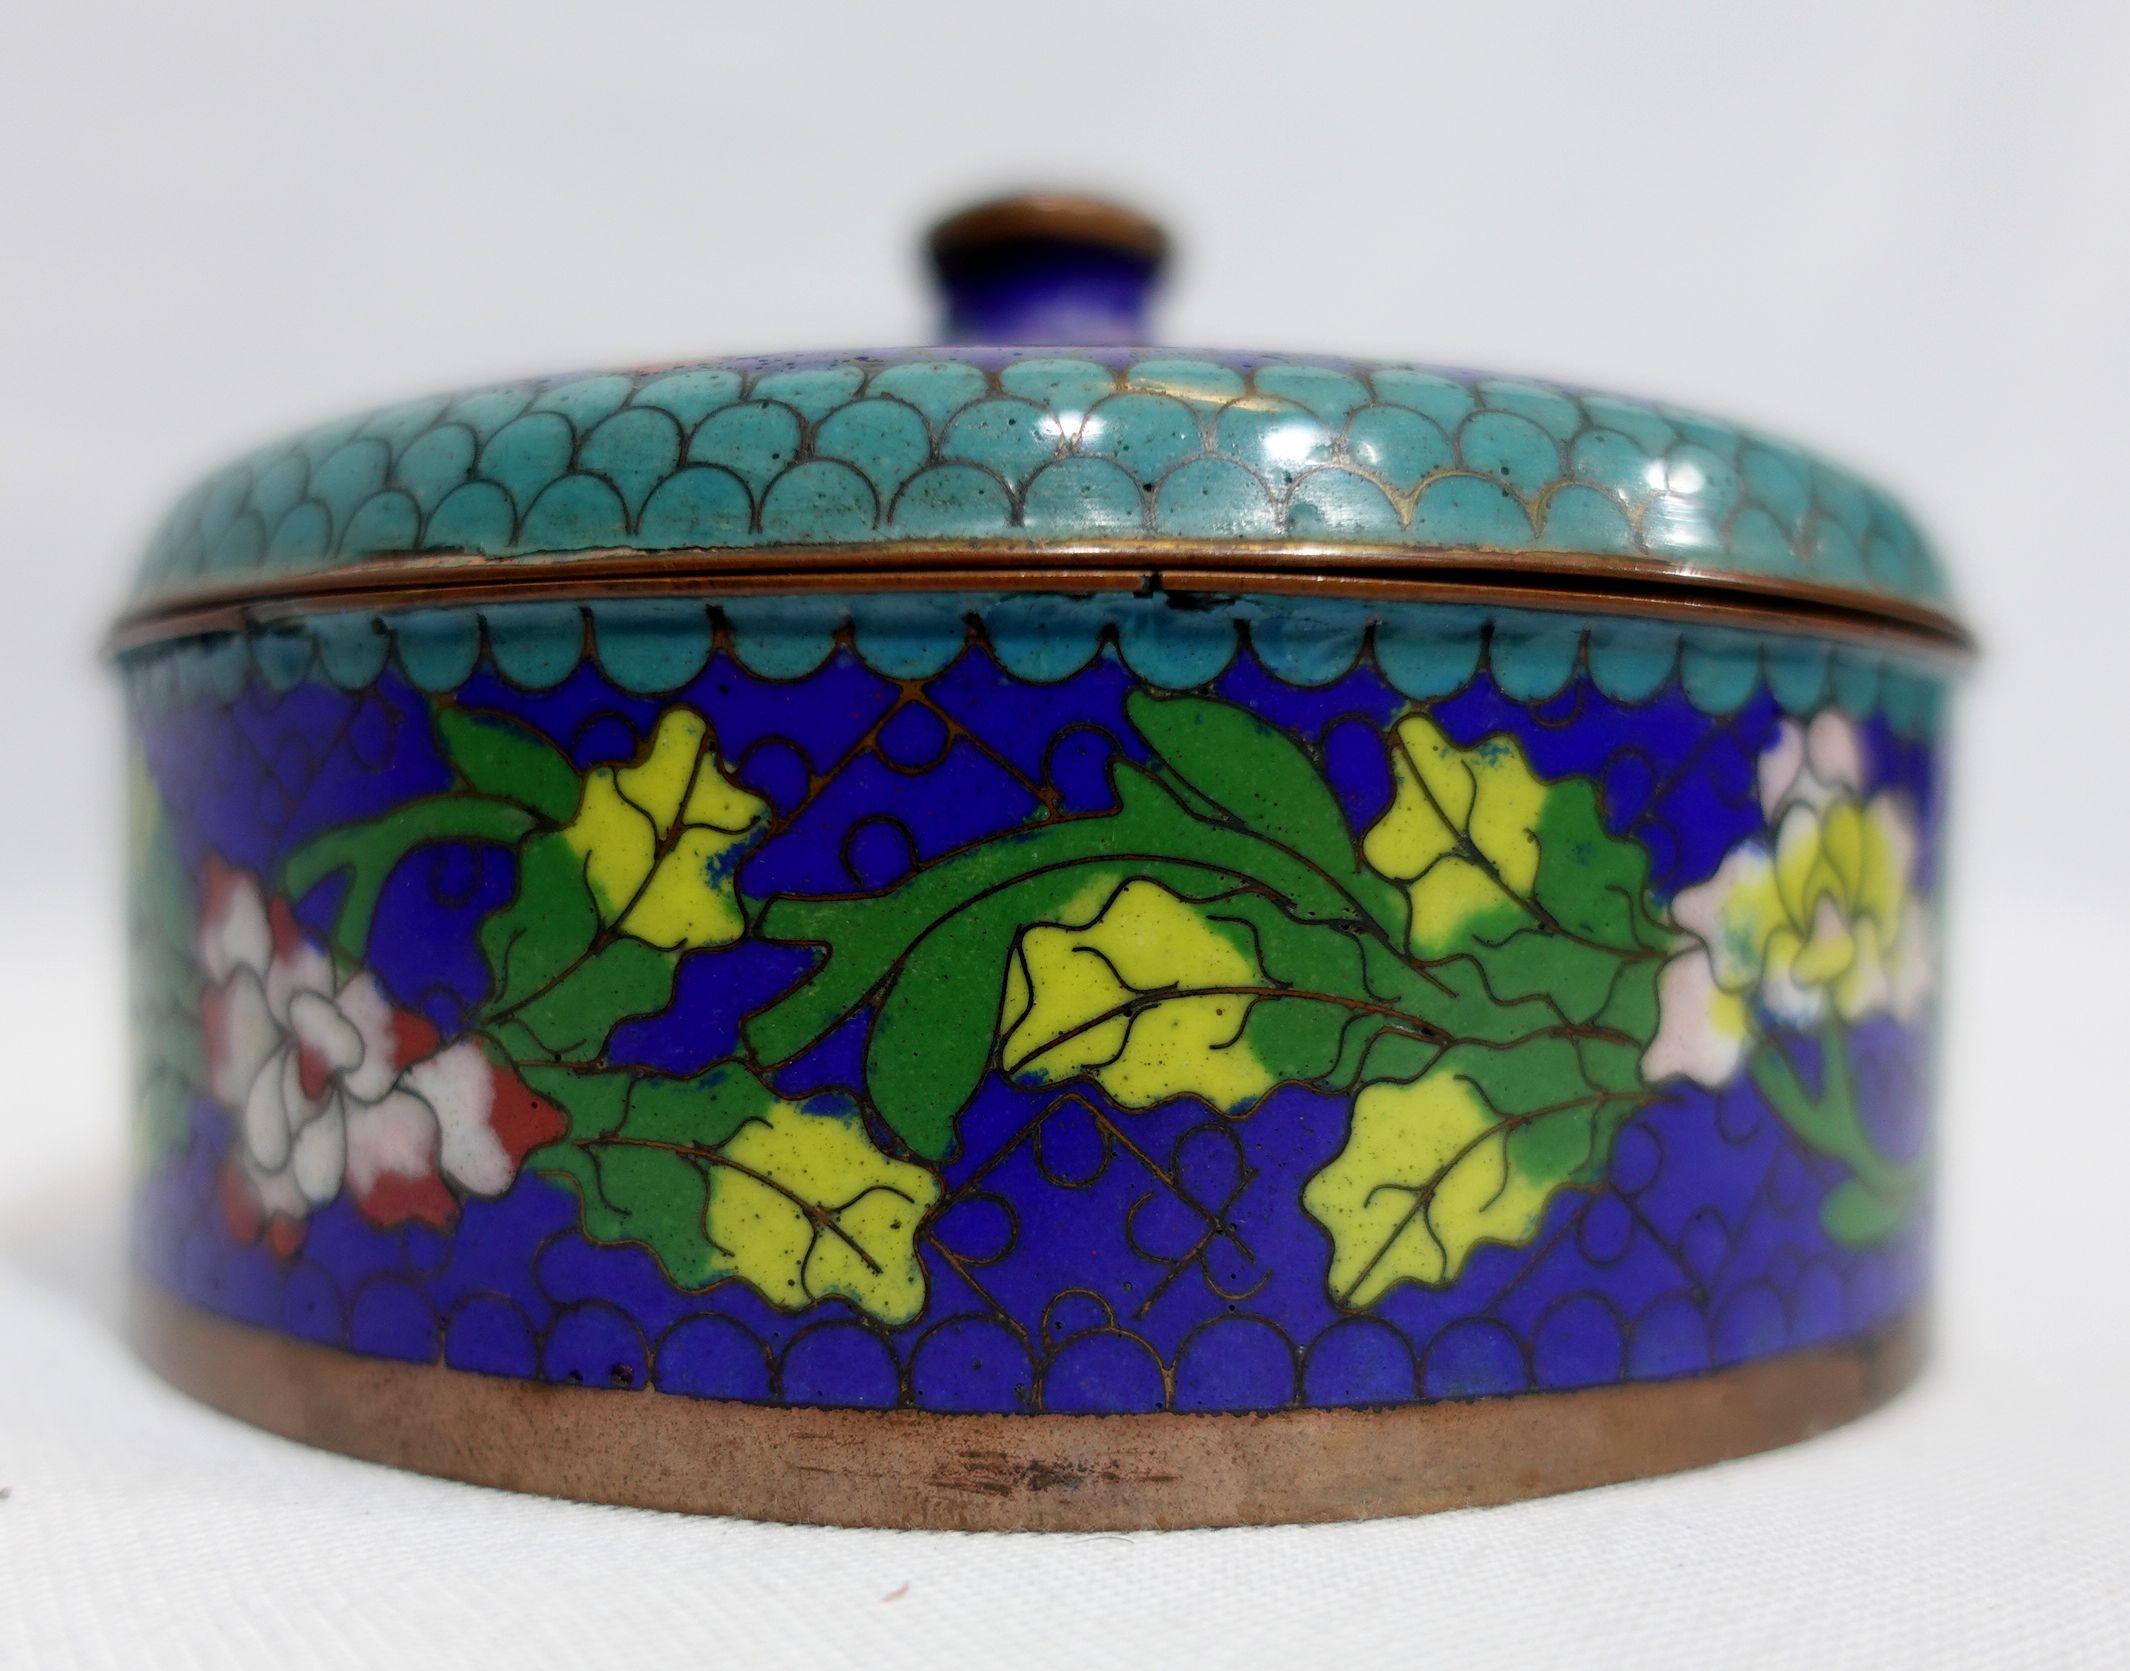 Antique Chinese Cloisonné Enamel Round Lidded Box 19th Century CO#01 In Good Condition For Sale In Norton, MA